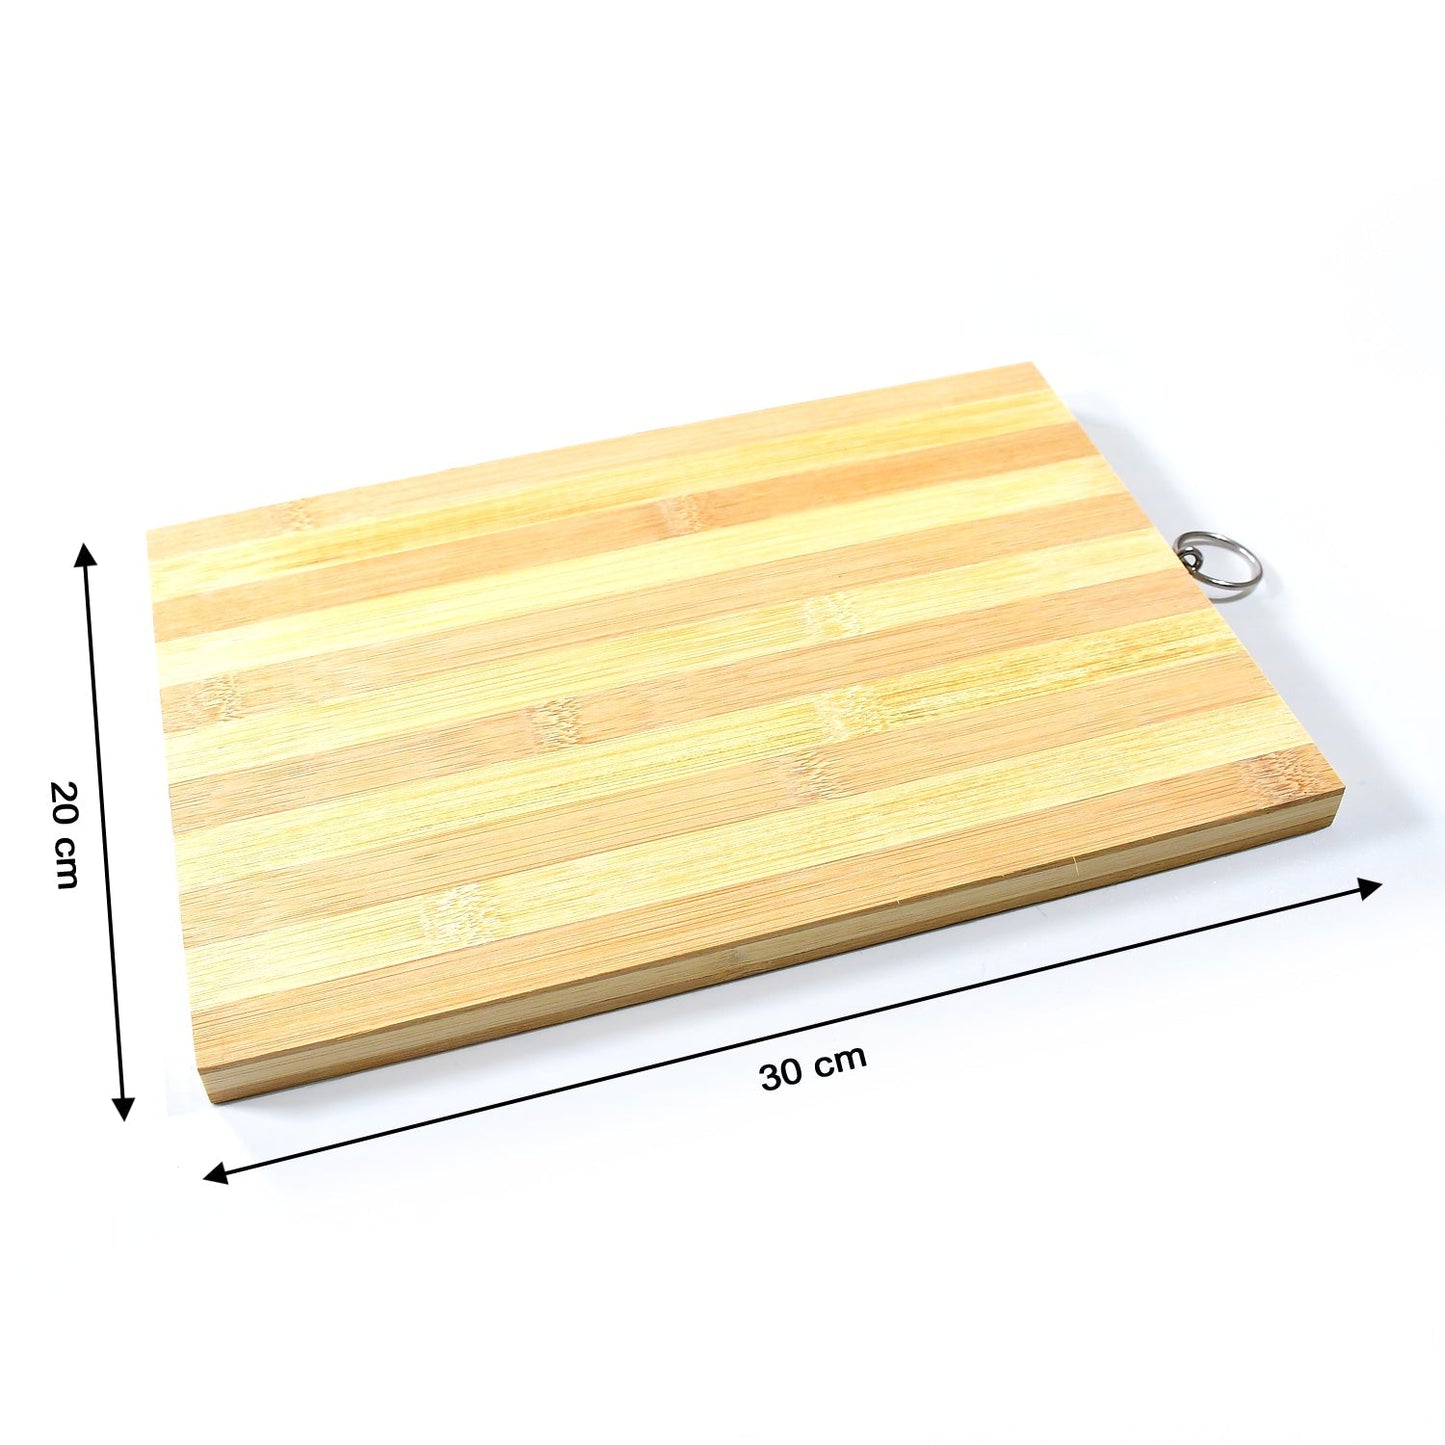 2193 Natural Wood Chopping Cutting Board for Kitchen Vegetables, Fruits & Cheese, BPA Free. DeoDap